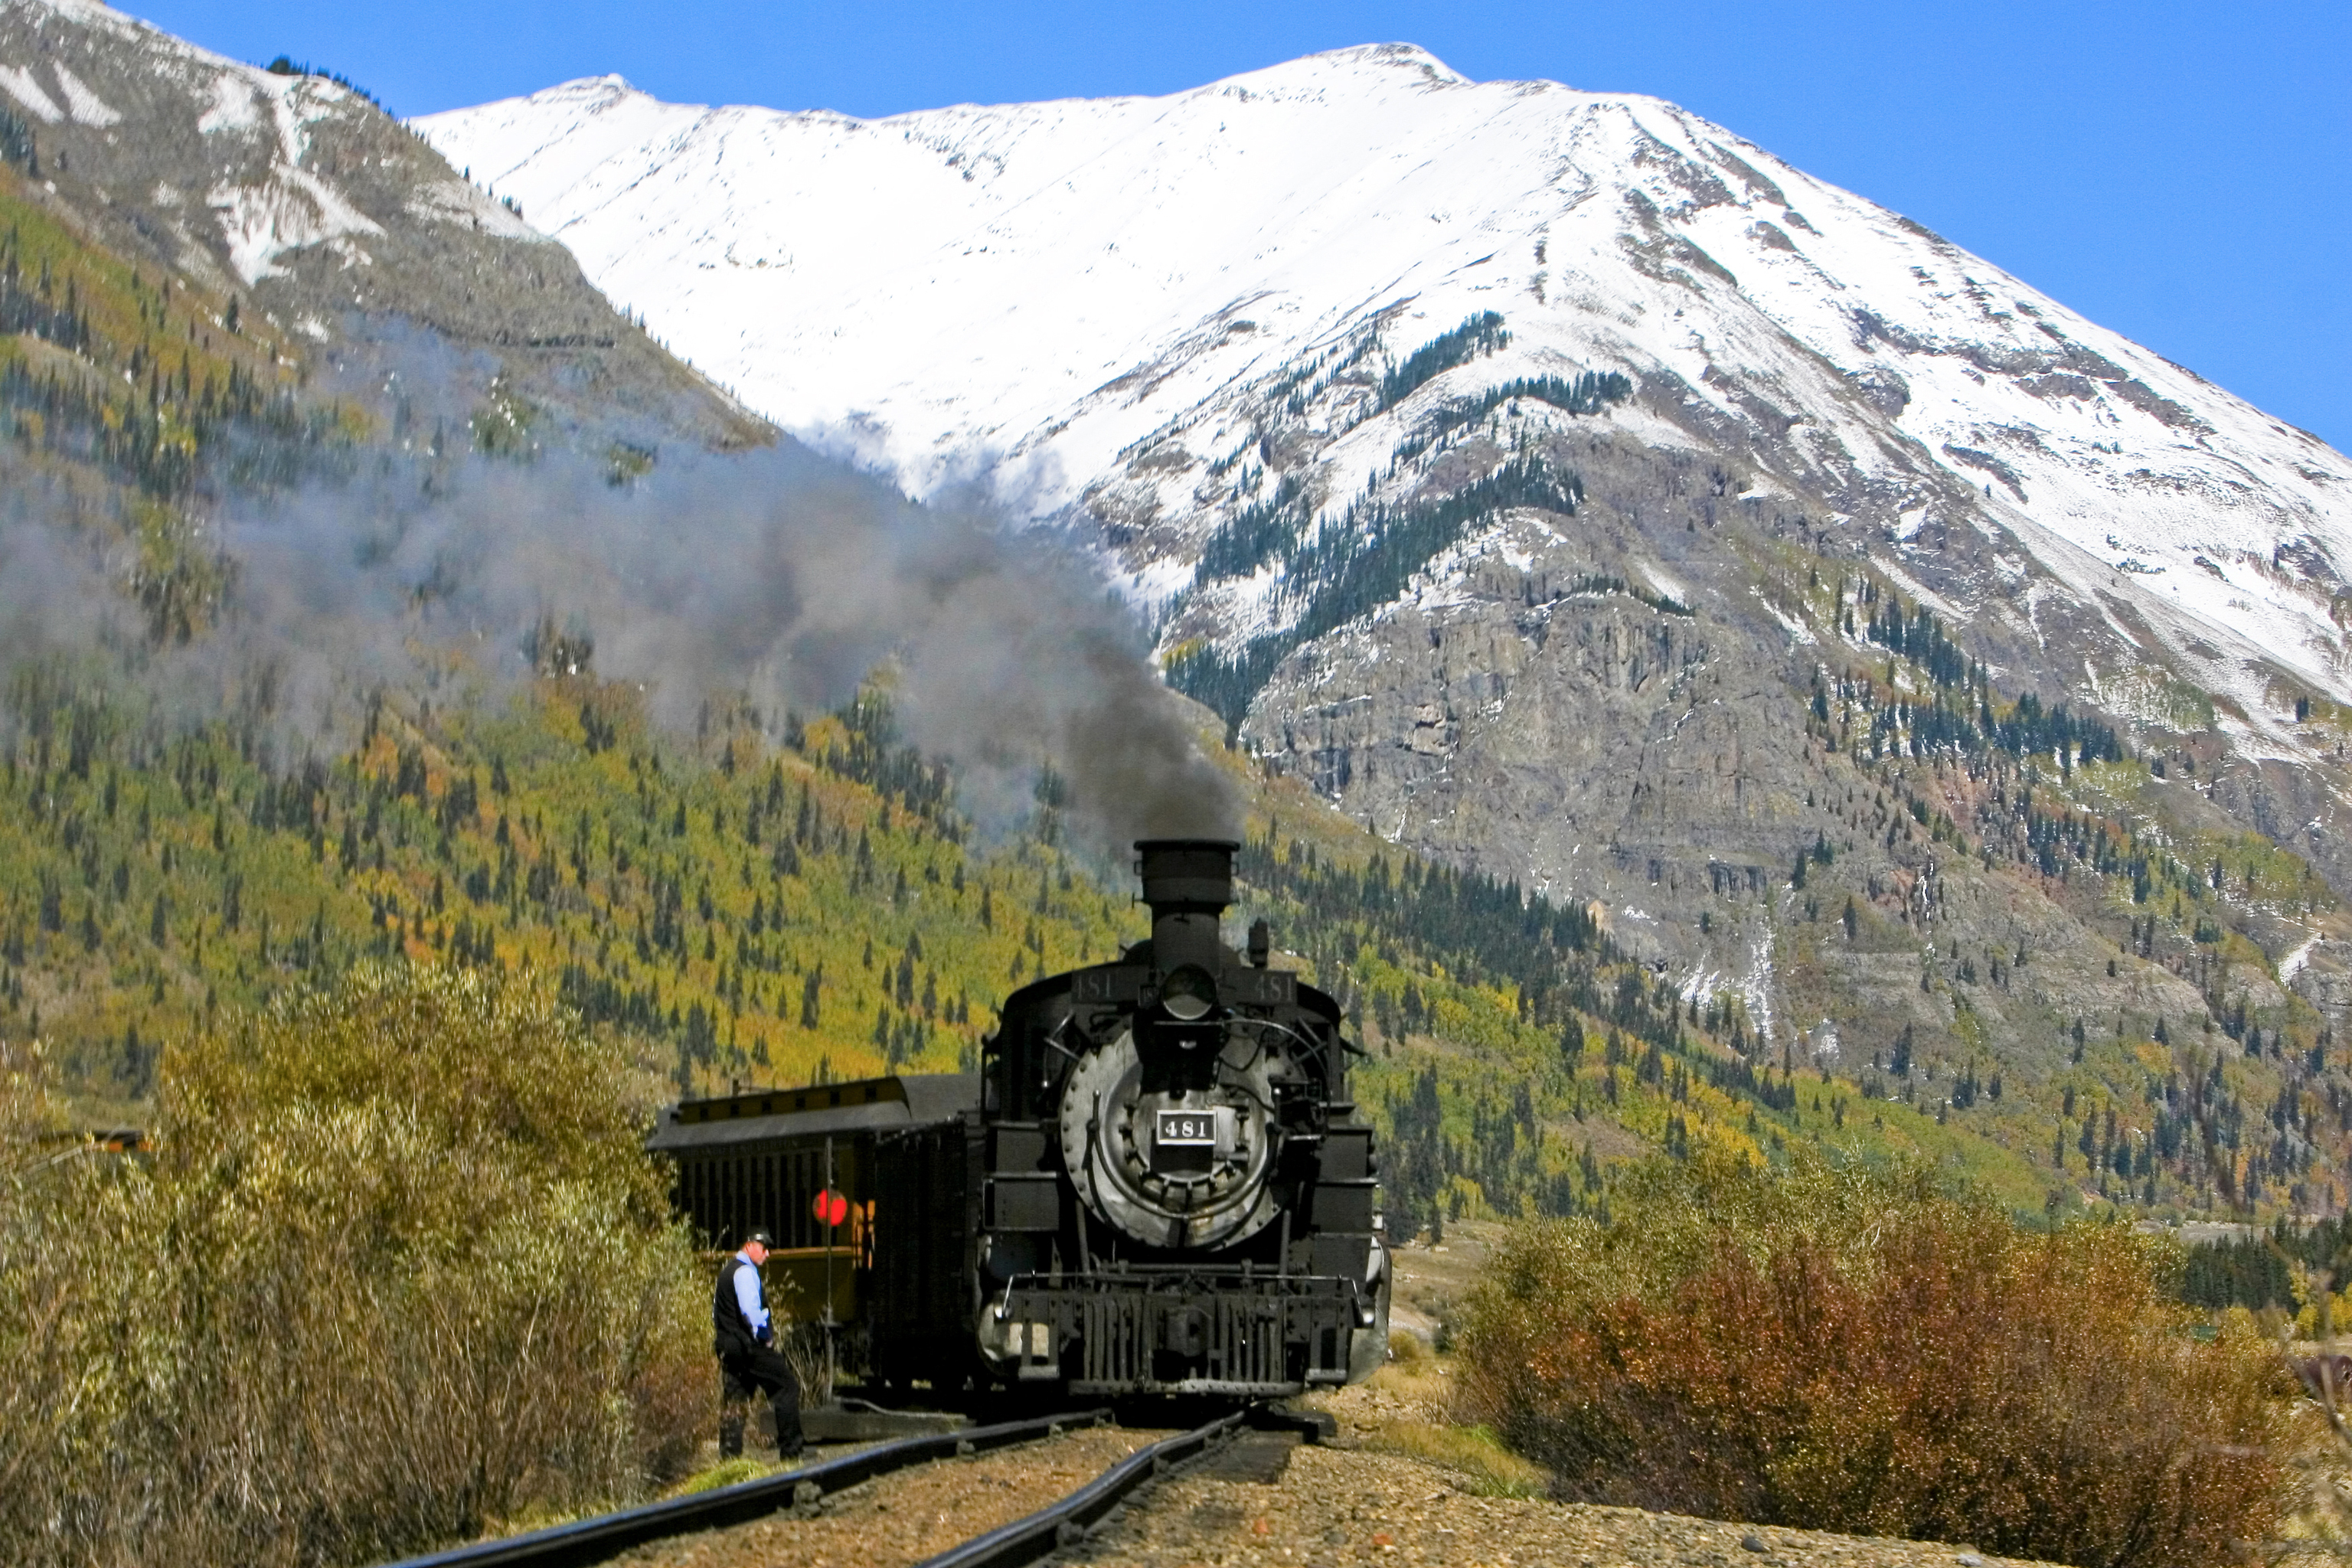 The Durango and Silverton Narrow Gauge Railroad and one of its ...